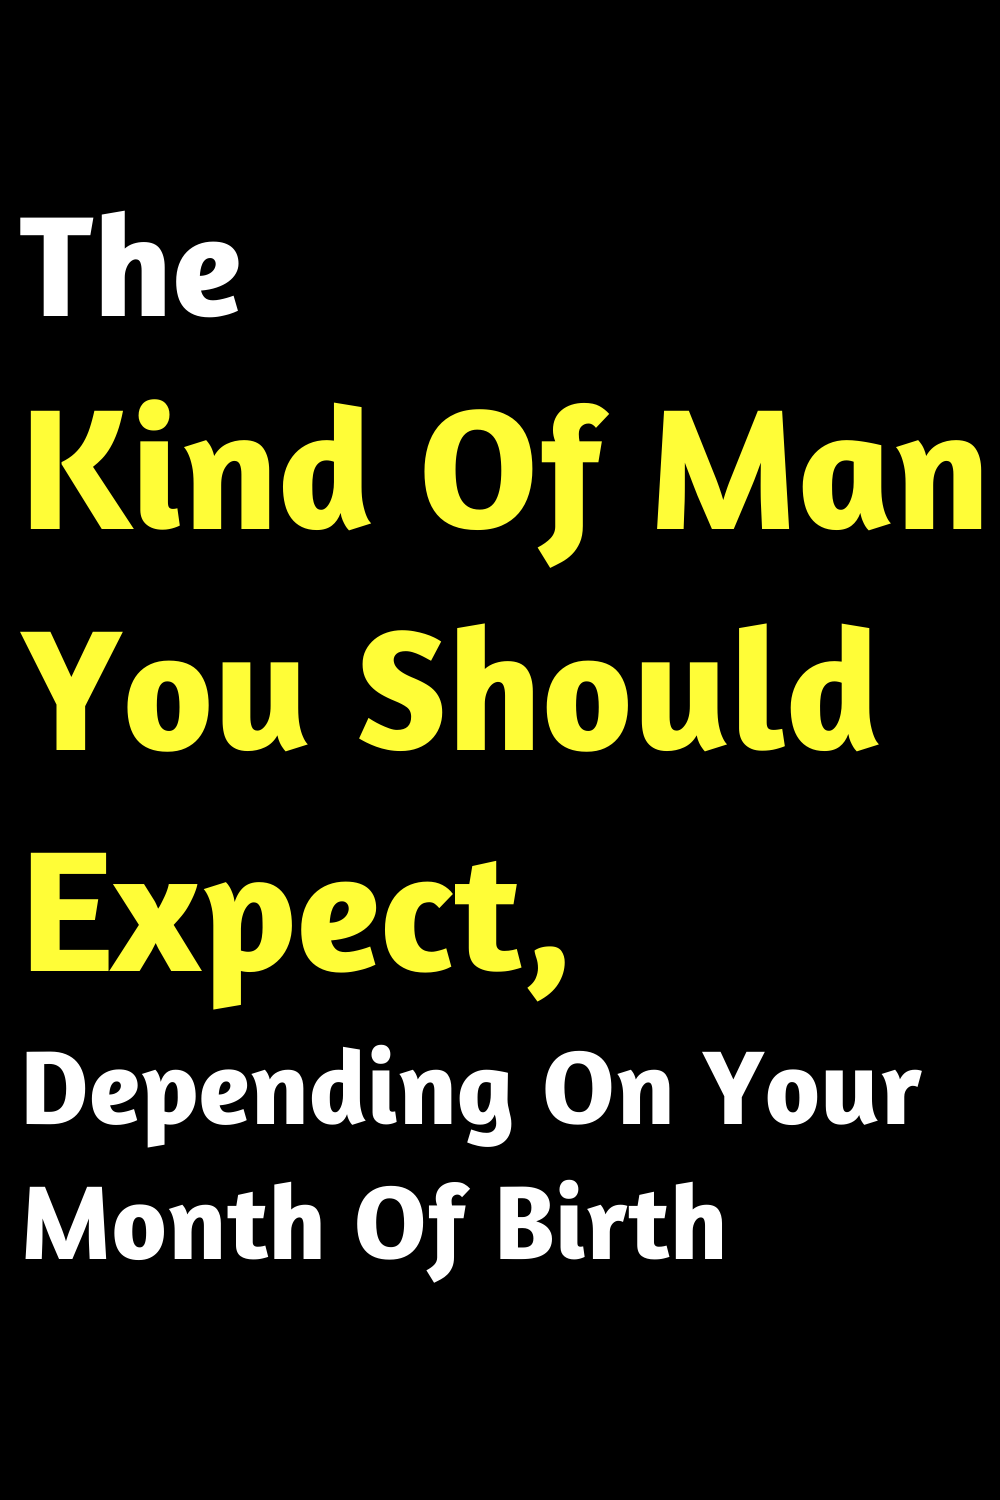 The Kind Of Man You Should Expect, Depending On Your Month Of Birth